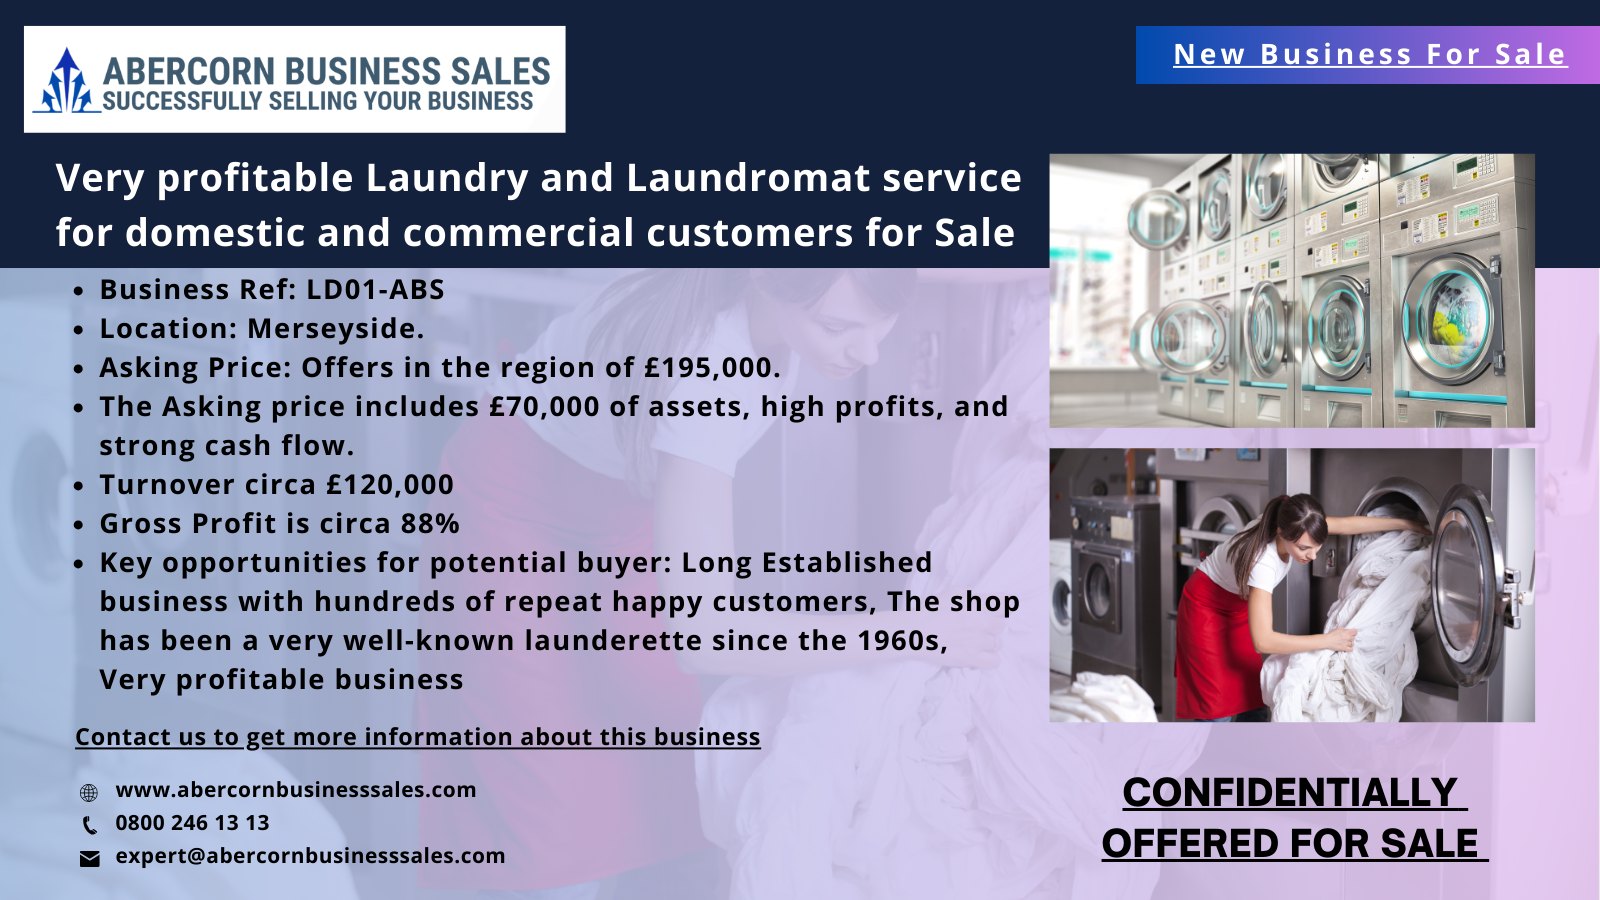 LD01-ABS - Very profitable Laundry and Laundromat service for domestic and commercial customers for Sale